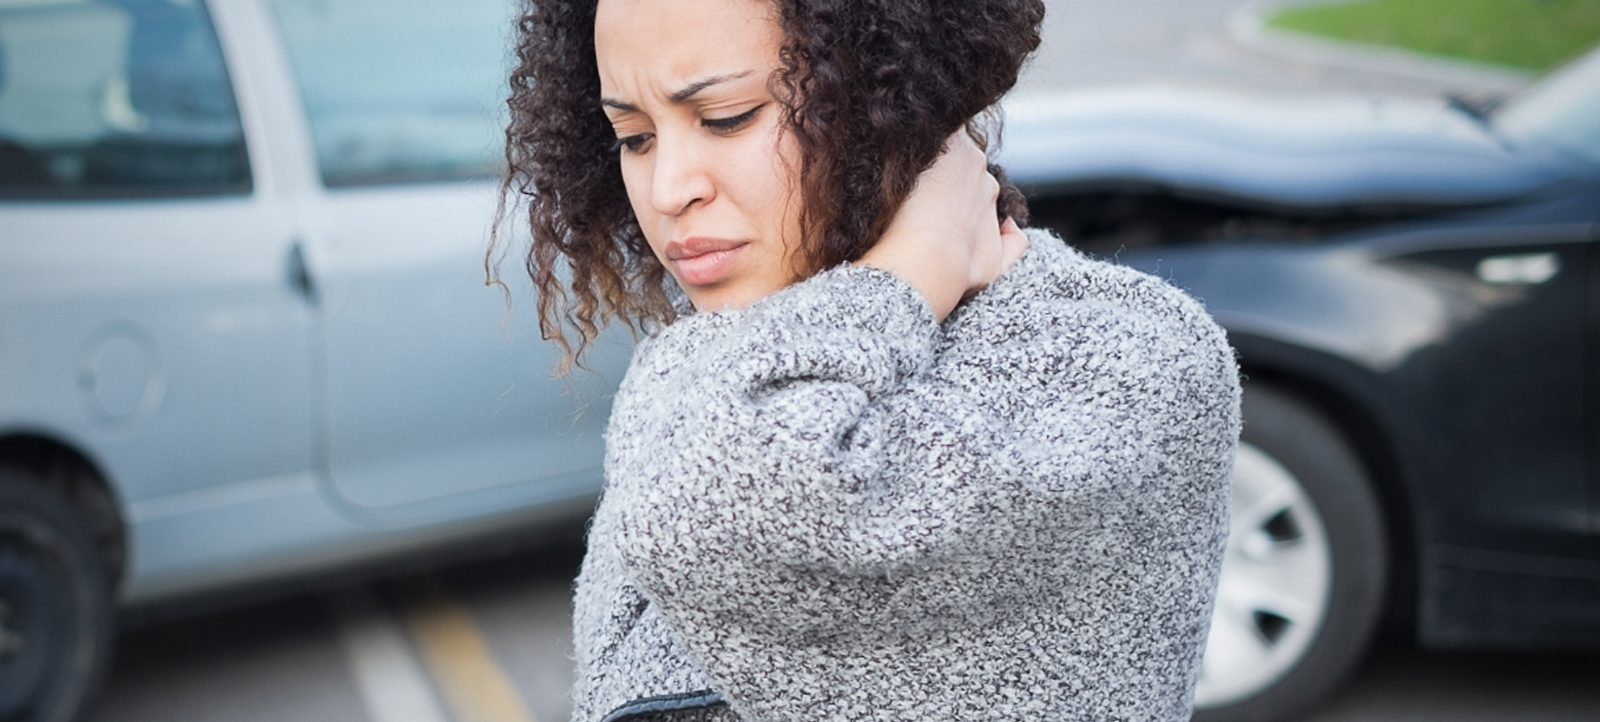 Woman holds her neck in pain after a whiplash auto accident.